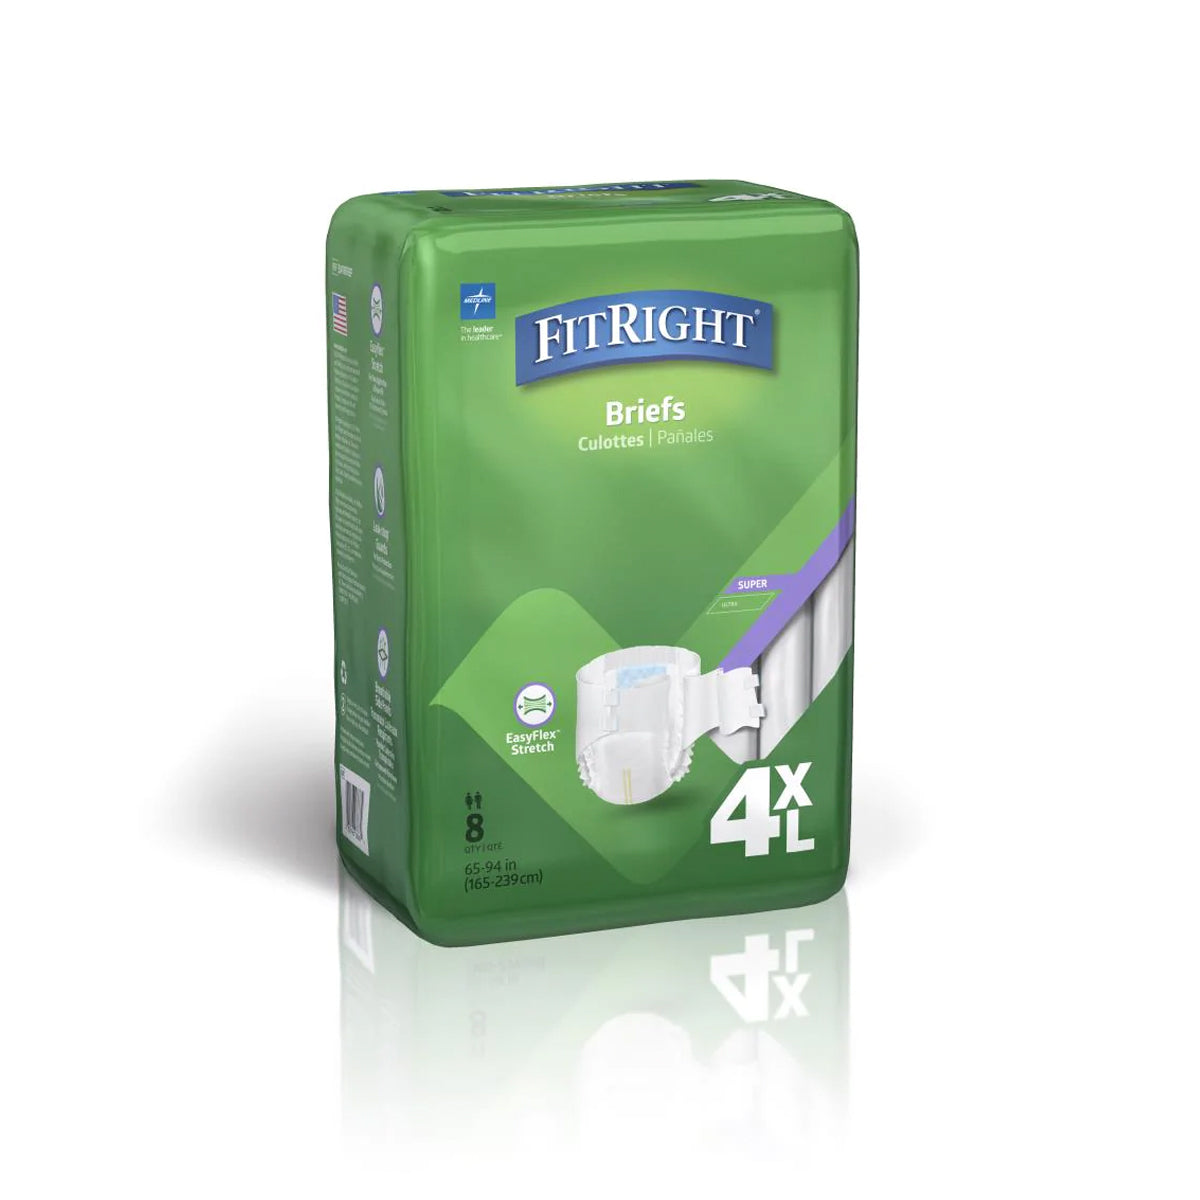 Medline 11in Sterile Maternity Pads with Tails-Shop All